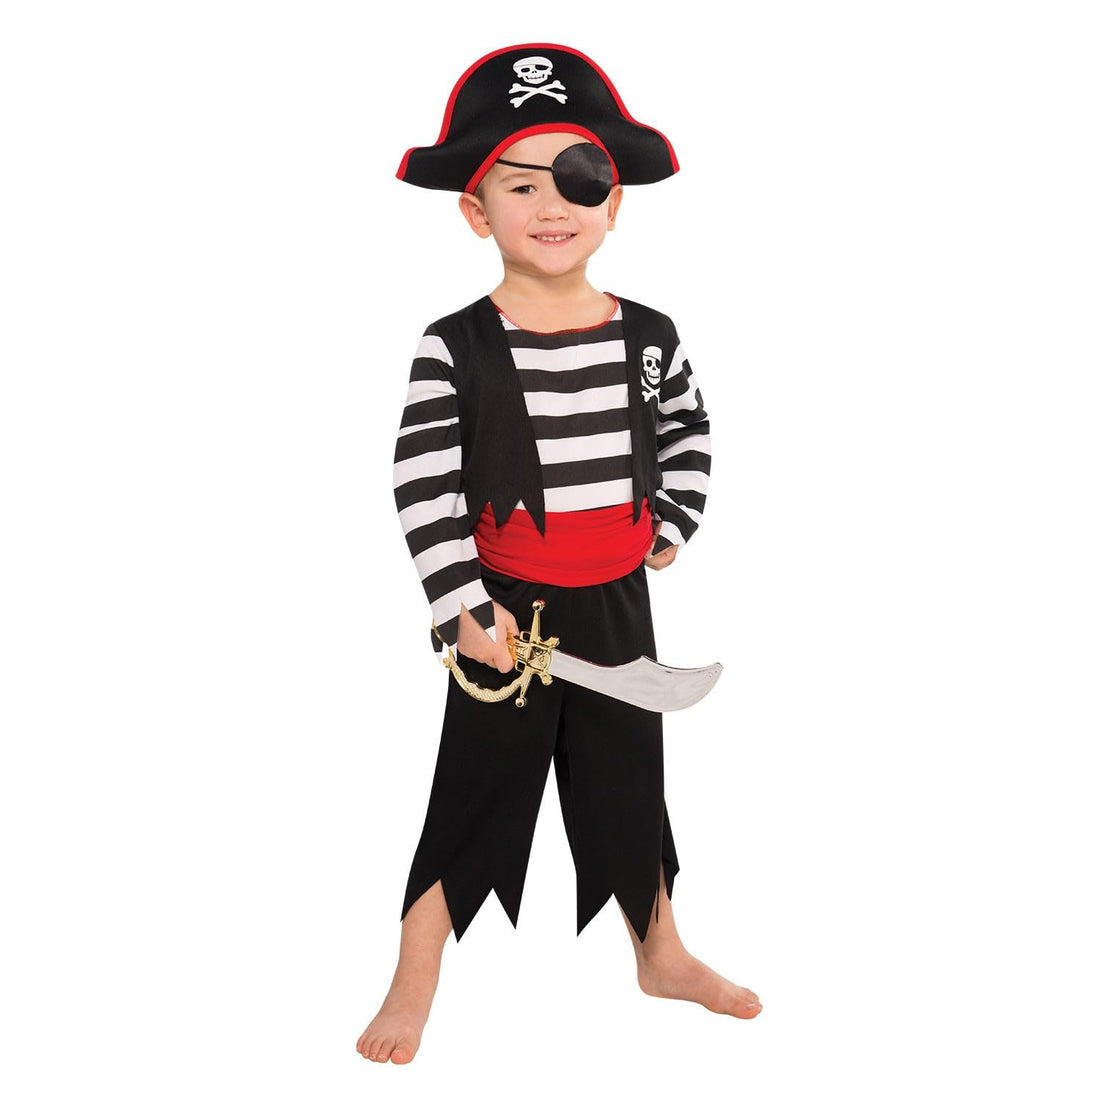 amscan 9904812 Childs Deckhand Pirate Costume (6-8 years)